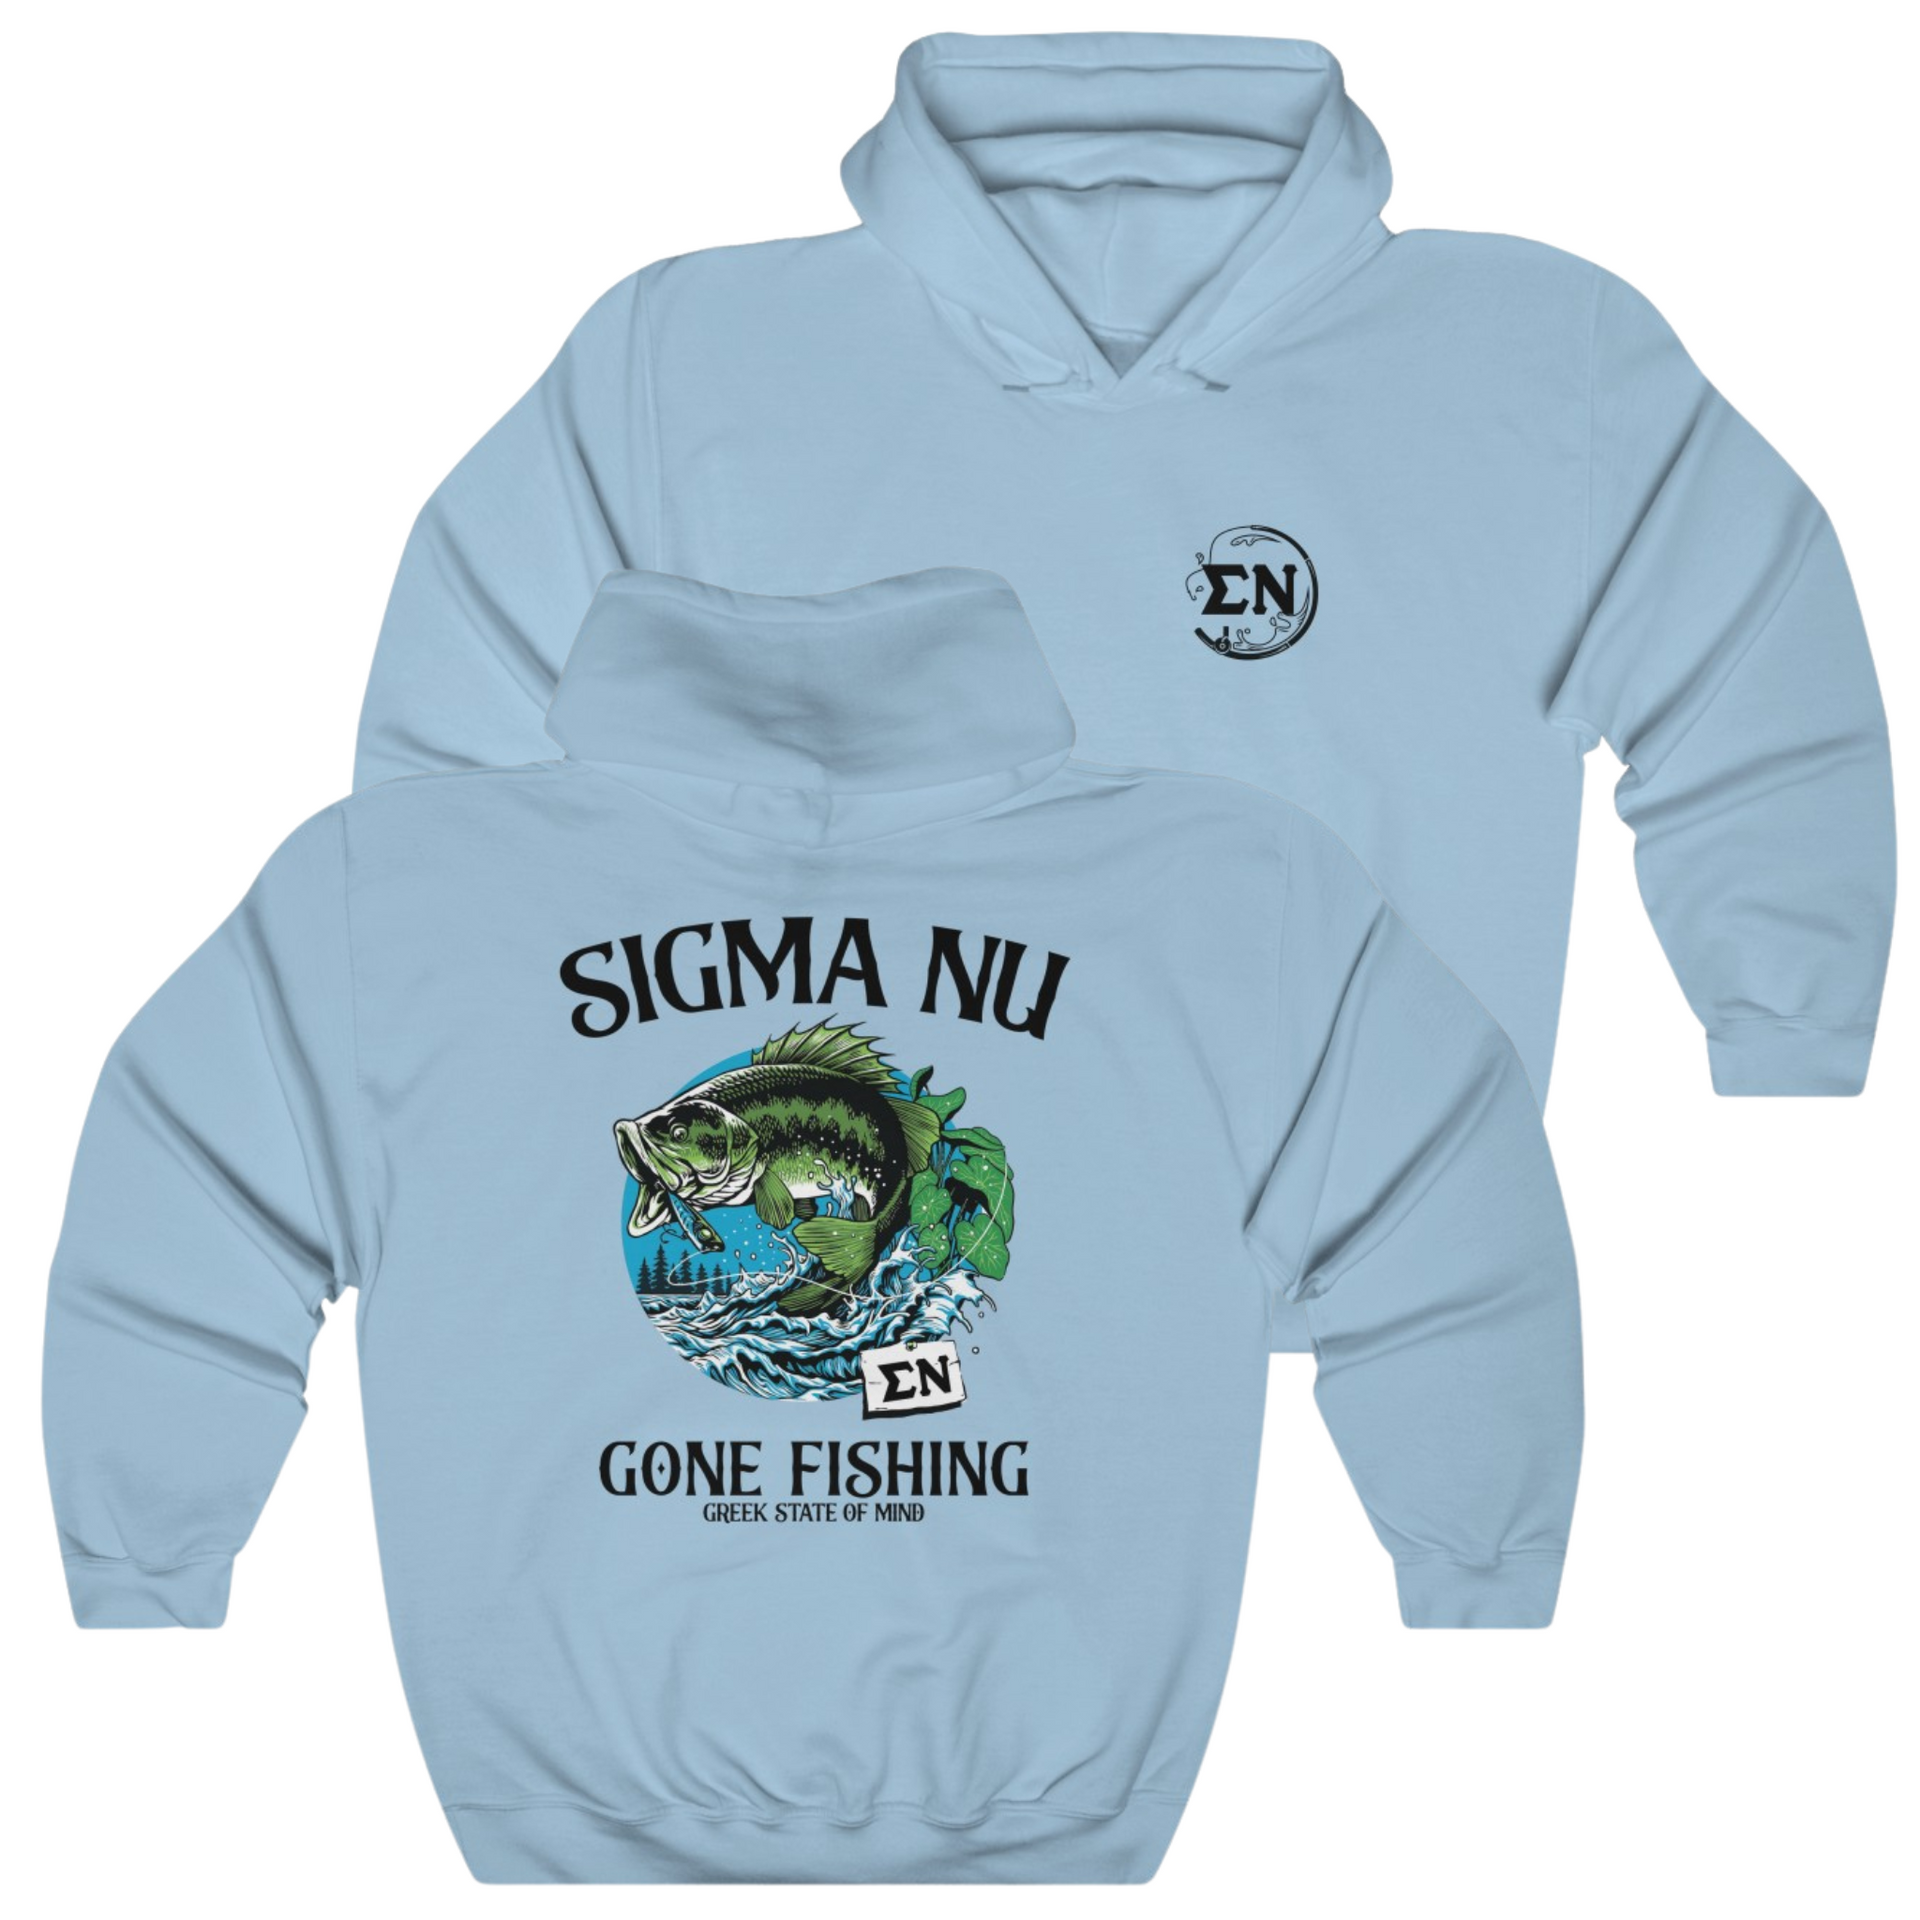 Light Blue Sigma Nu Graphic Hoodie | Gone Fishing | Sigma Nu Clothing, Apparel and Merchandise